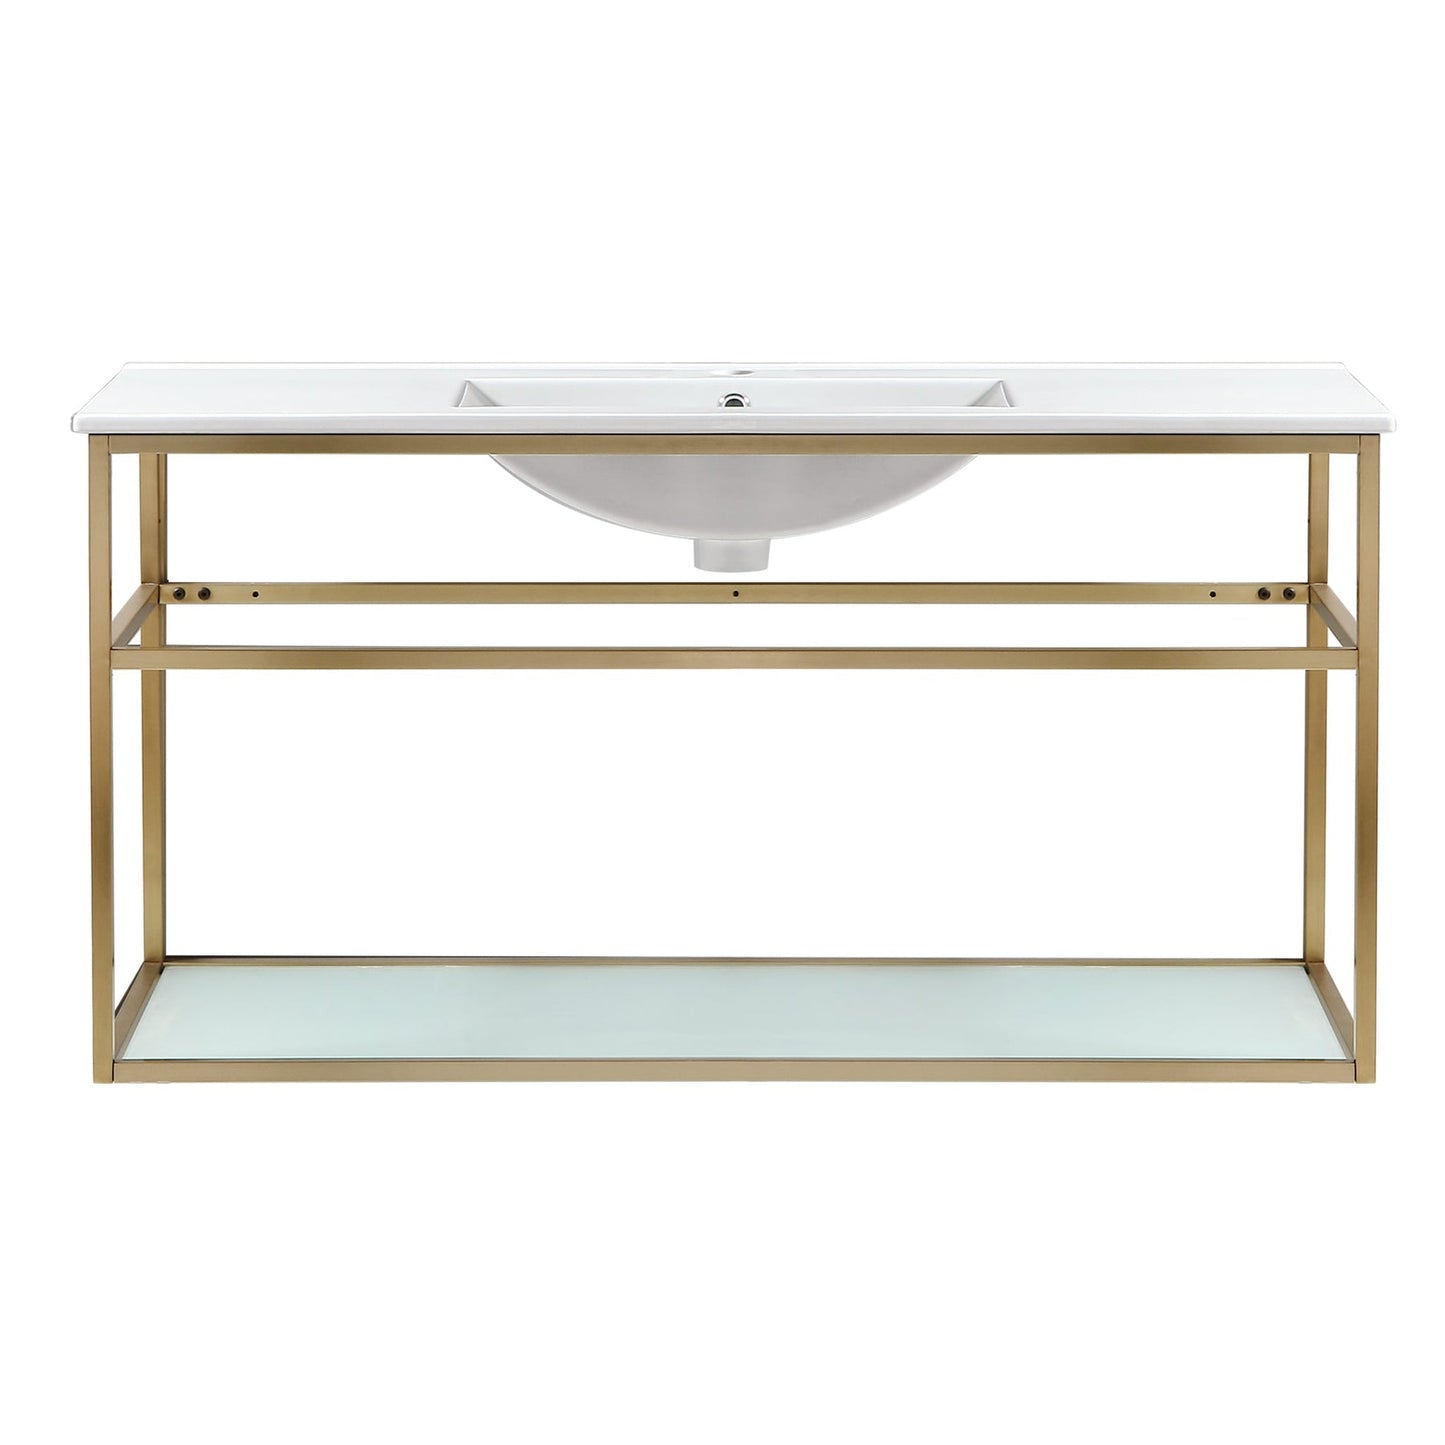 Swiss Madison Pierre 48" x 24" Wall-Mounted White Bathroom Vanity With Ceramic Single Sink and Gold Metal Frame